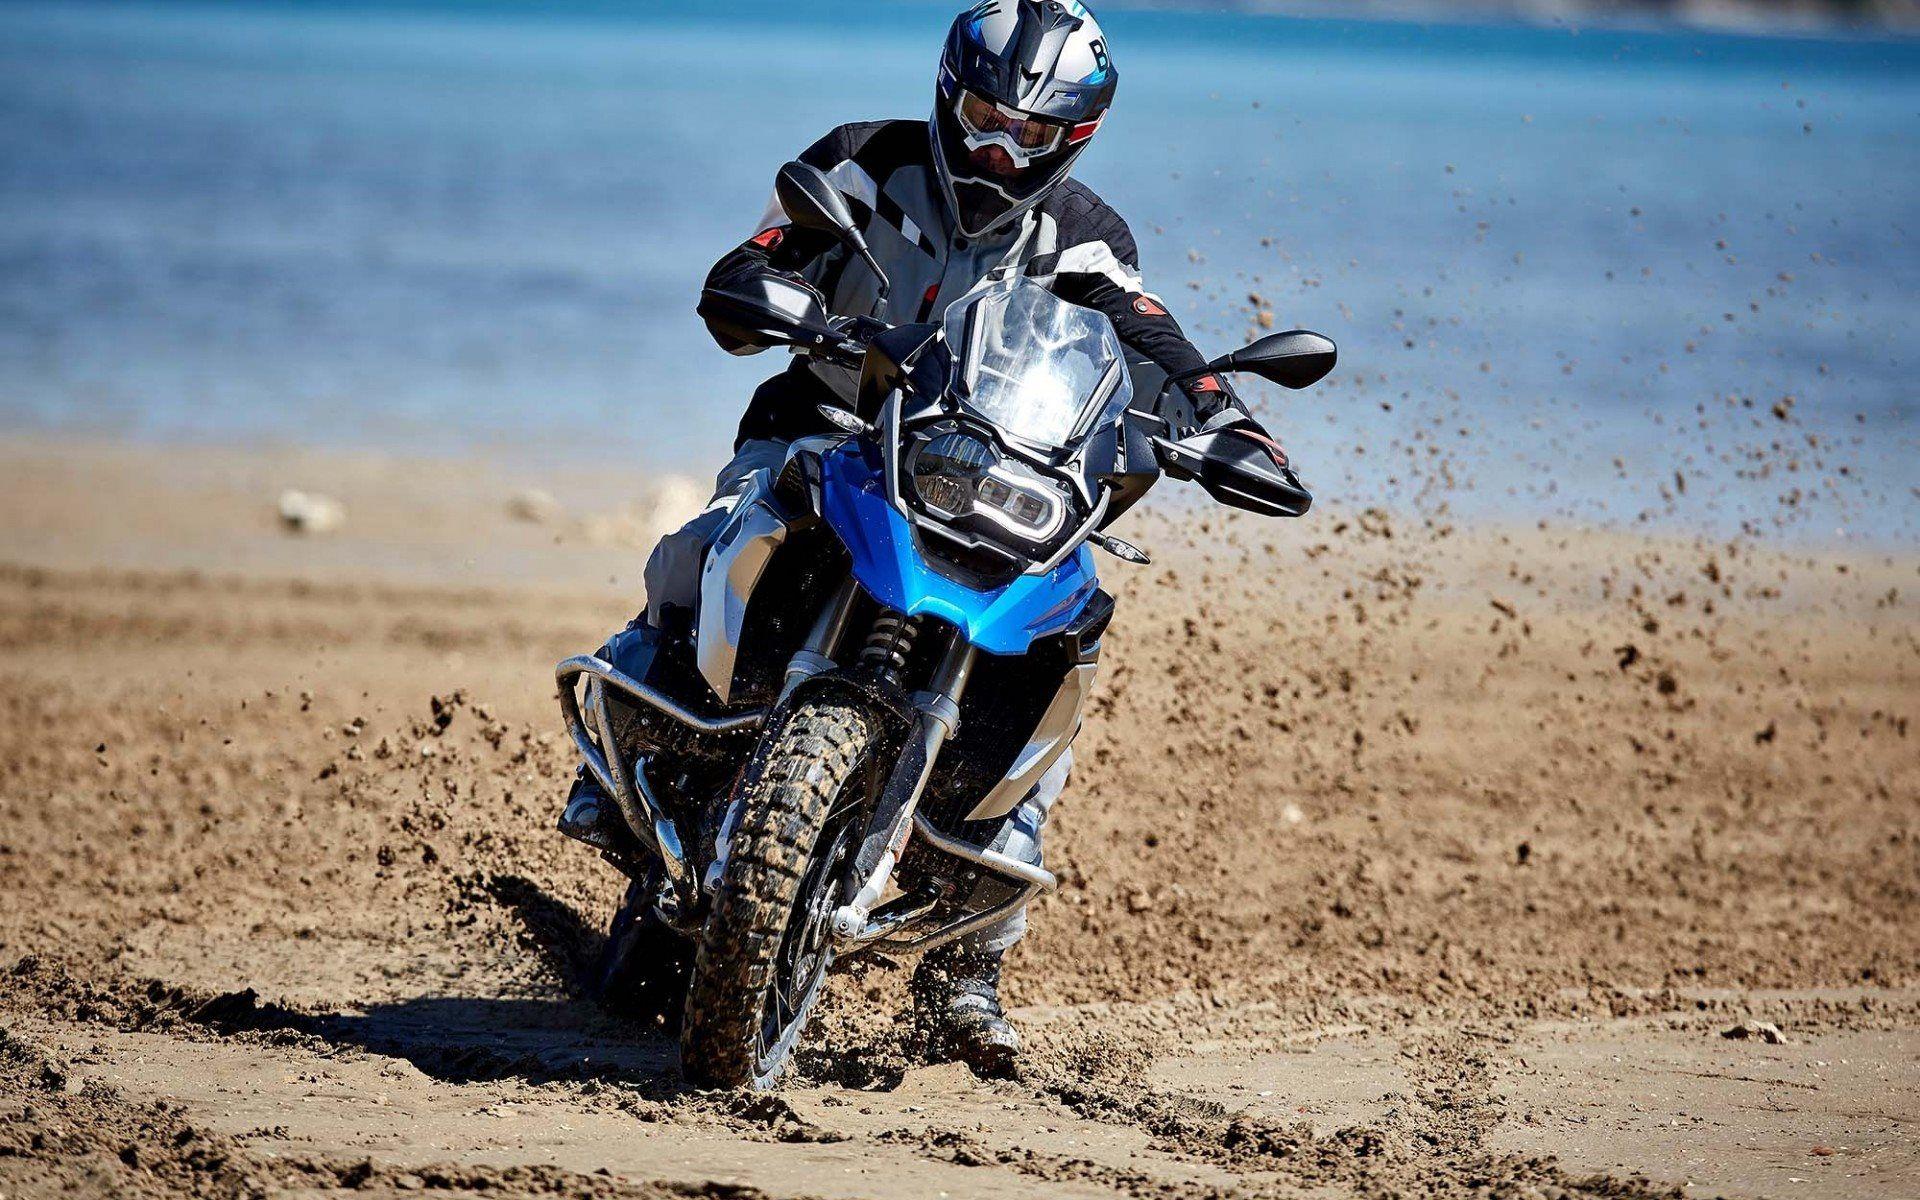 Download wallpaper BMW R1200GS, sportbikes, rally, rider